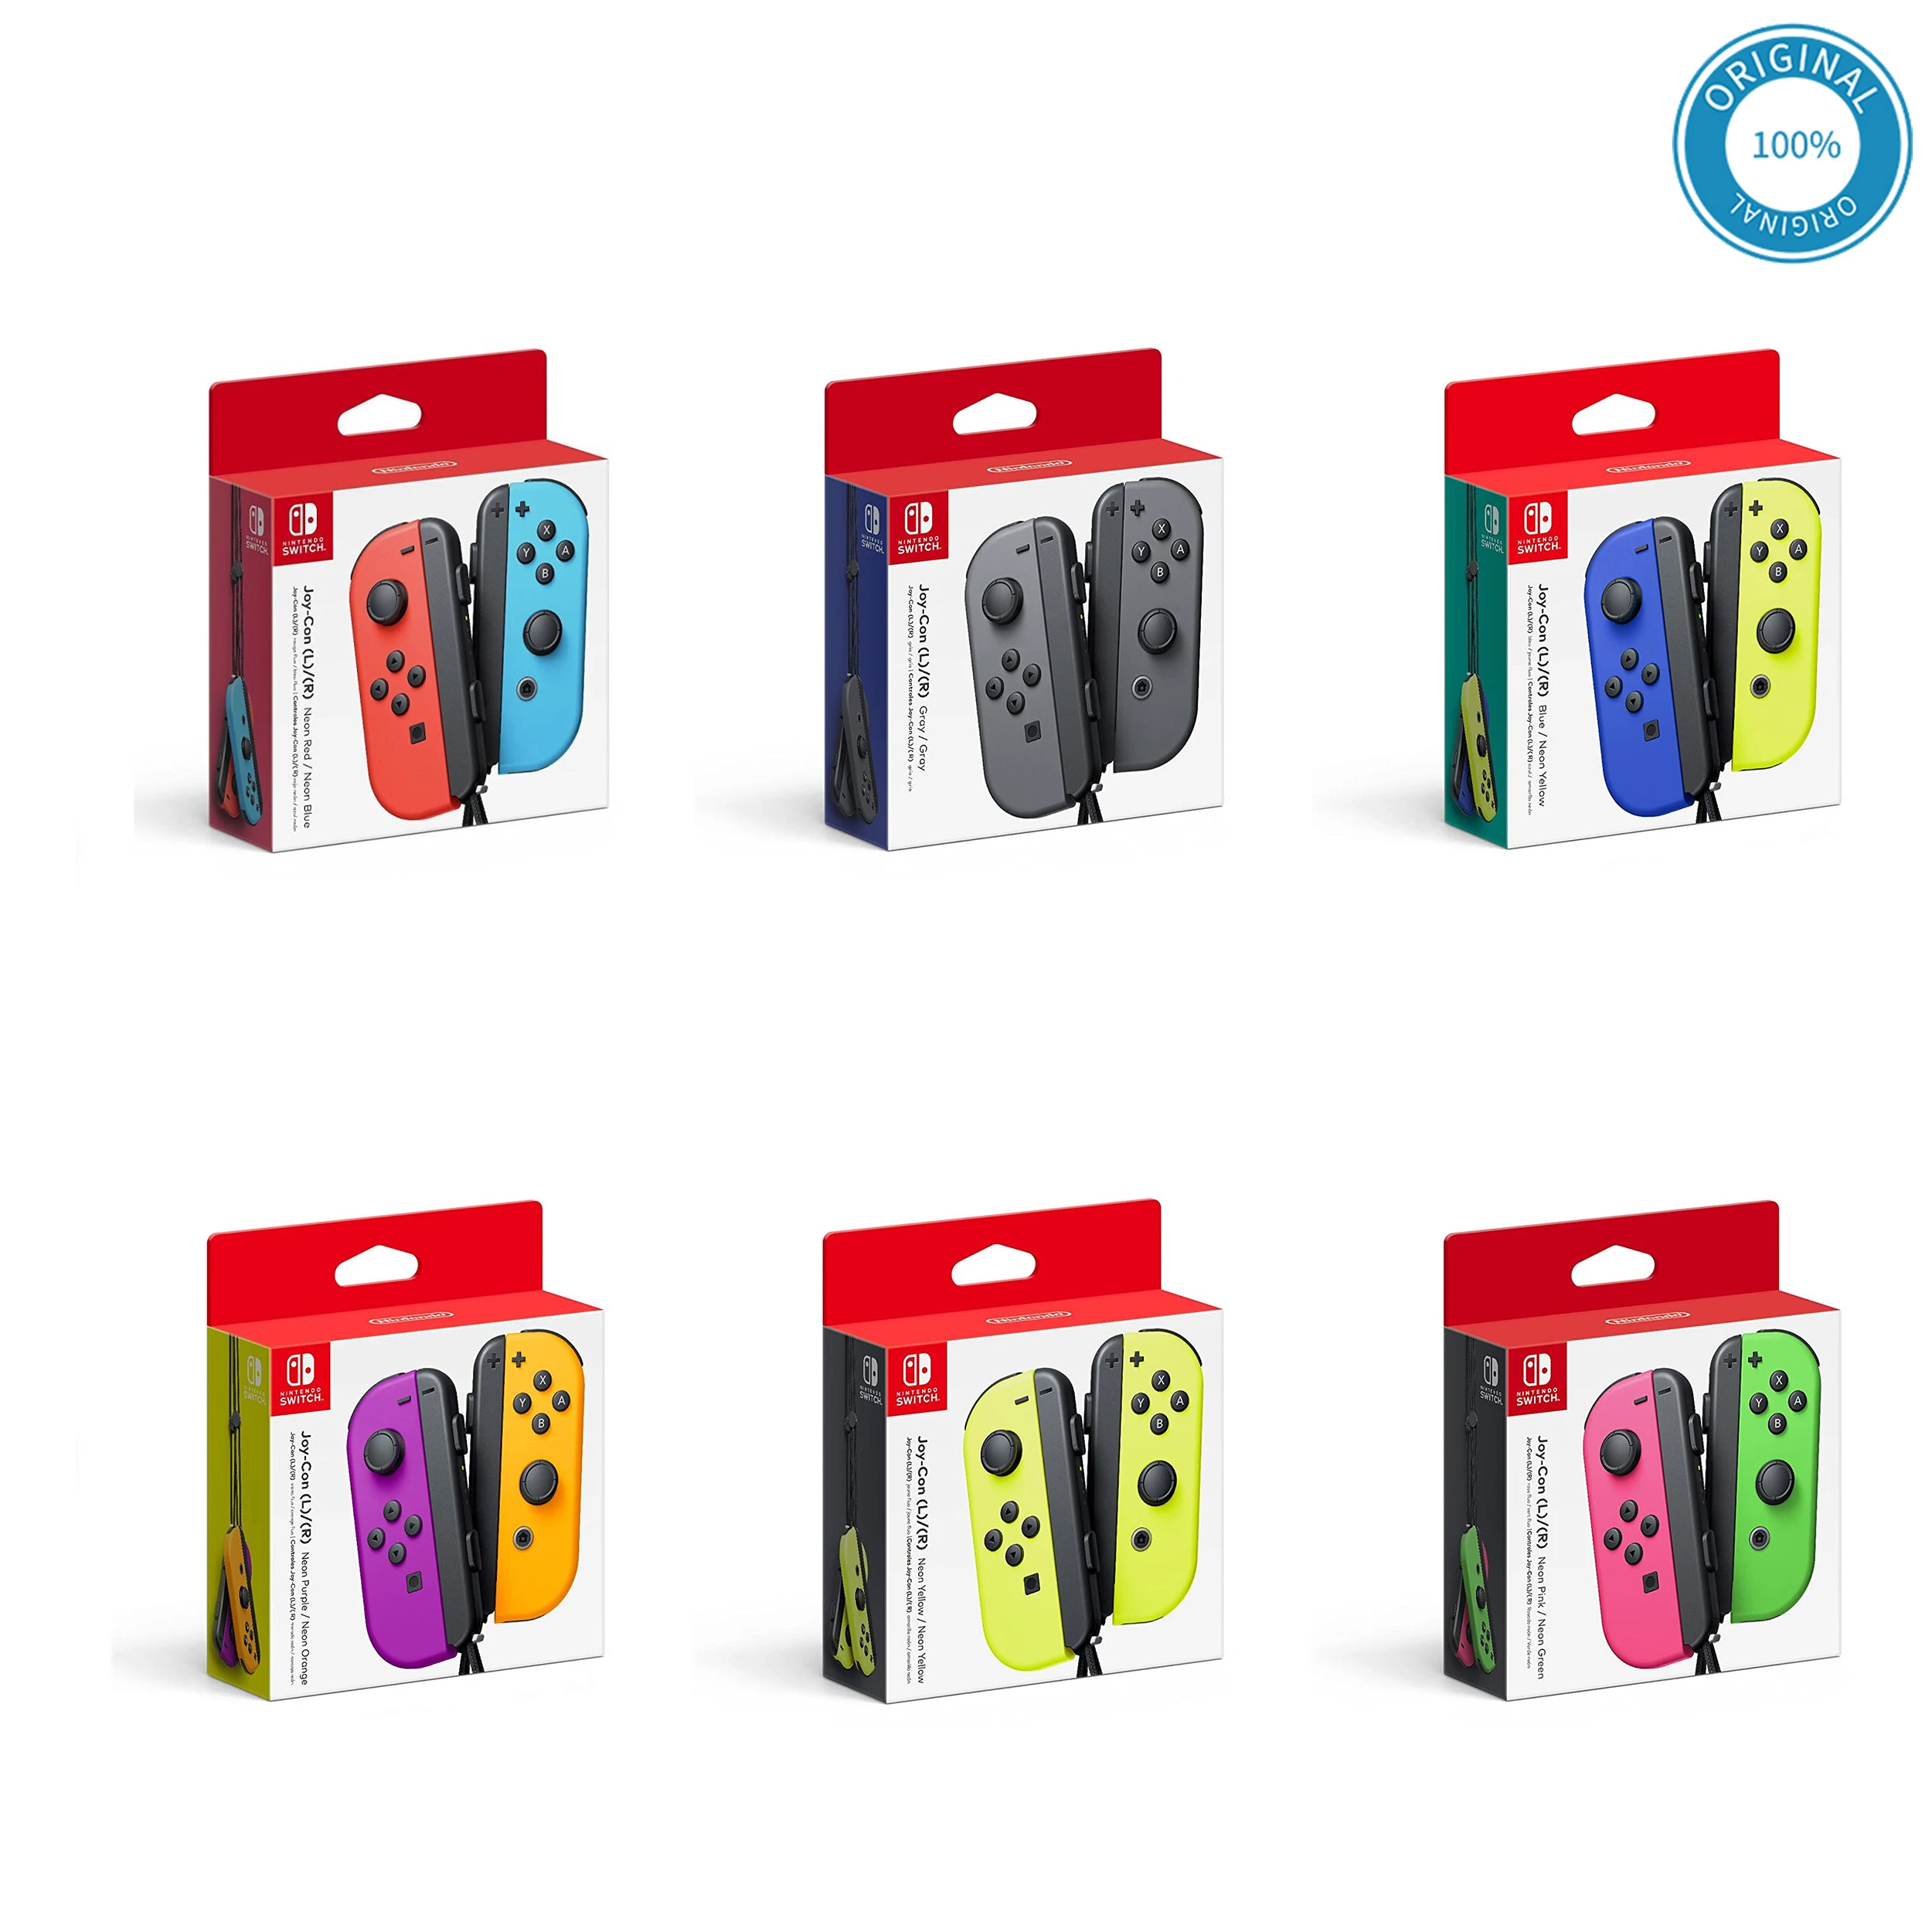 Nintendo Joy-Con (L/R) Controller Pair - Neon  Red/Blue/Yellow/Purple/Orange/Pink/Green and Grey - Joycon Controllers for  Switch